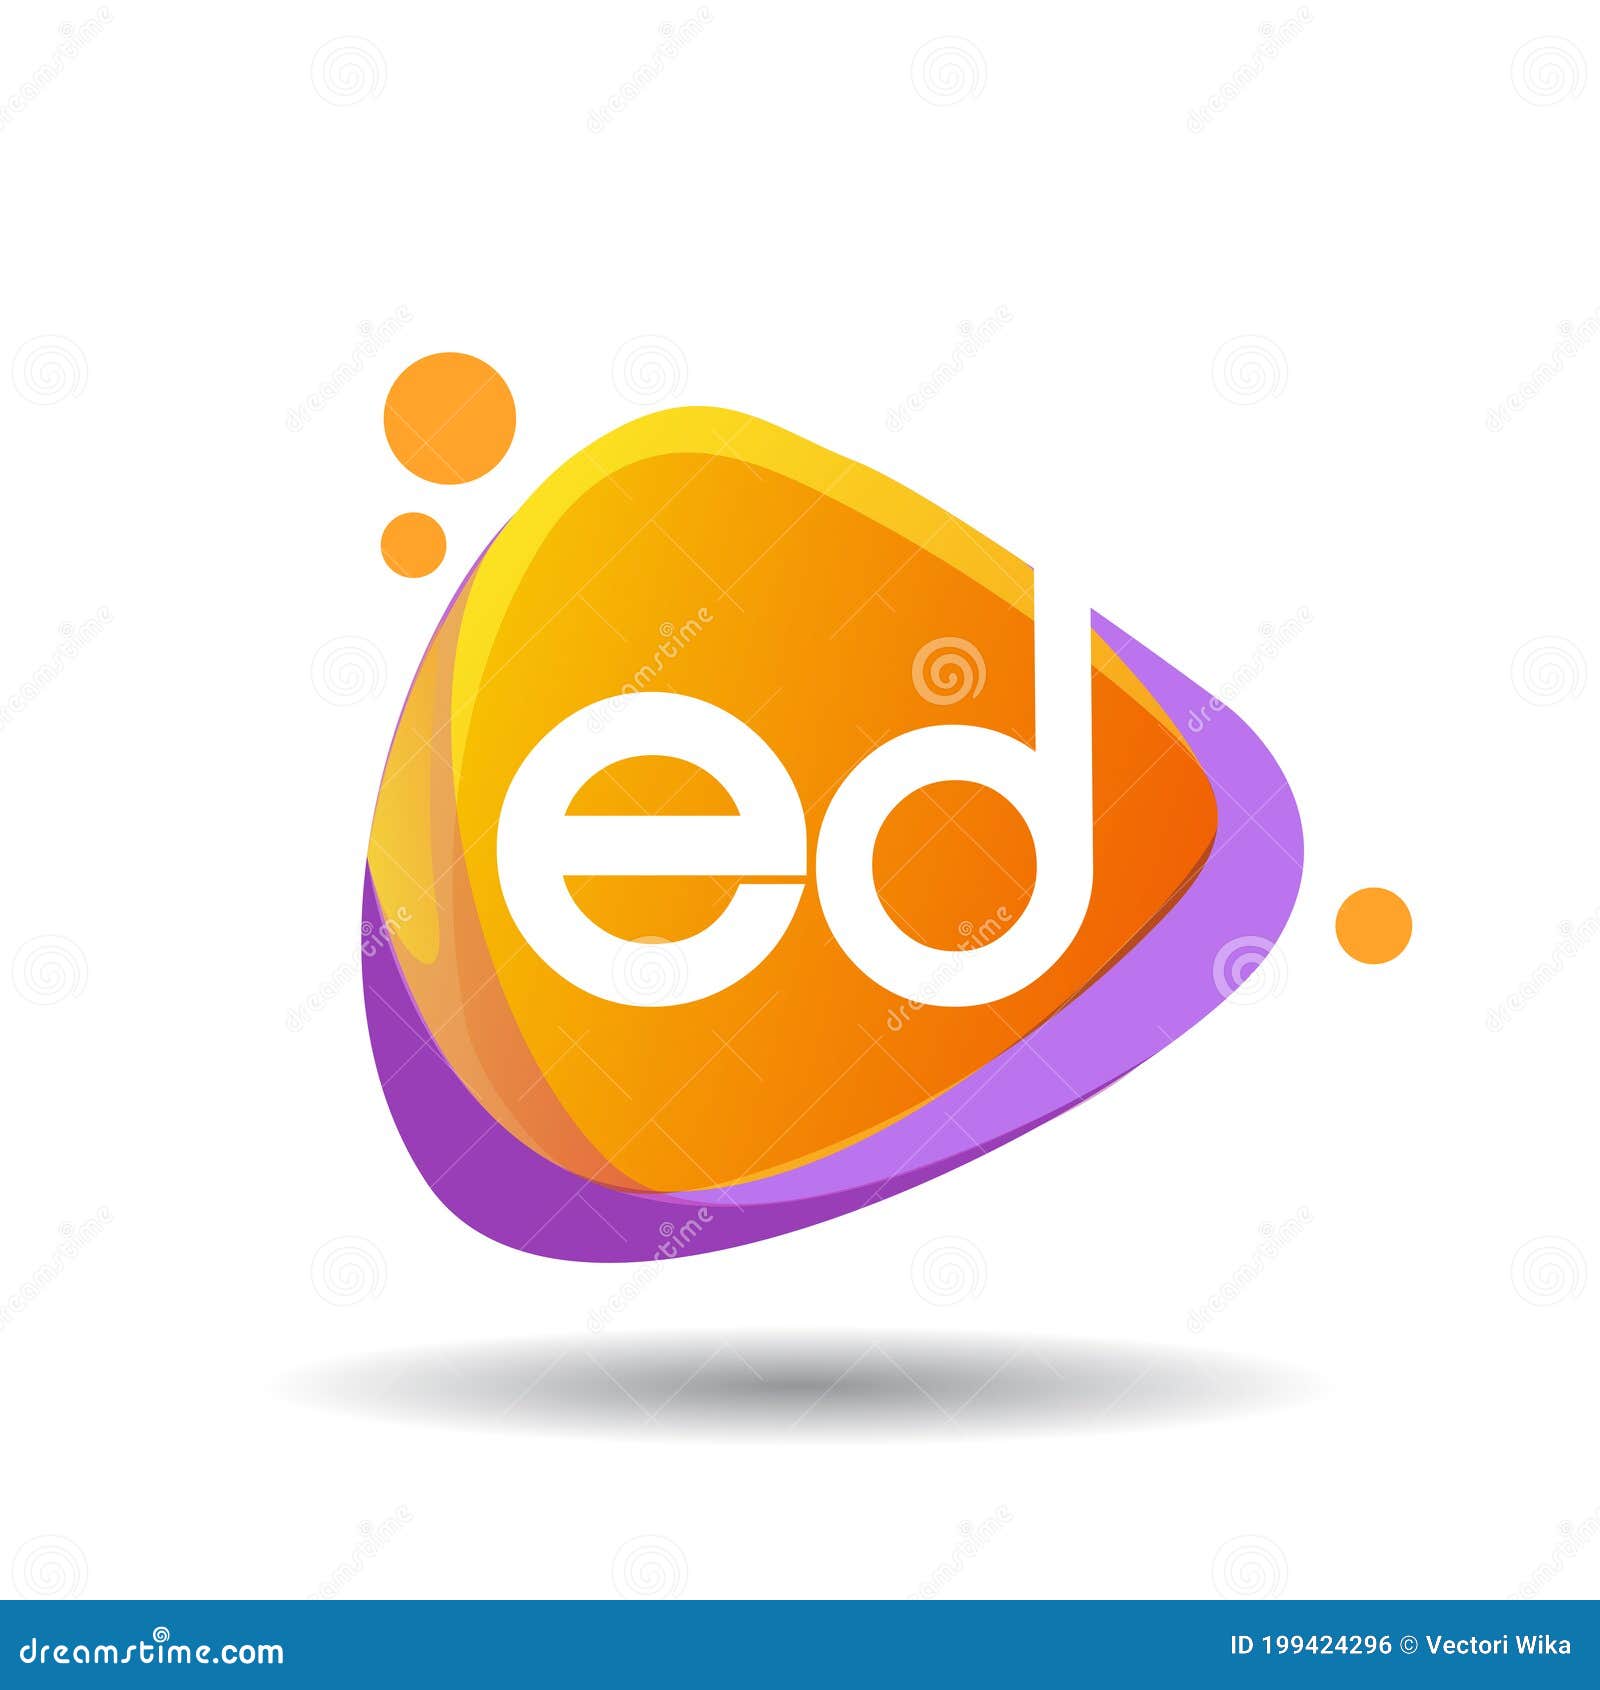 letter ed logo in triangle splash and colorful background, letter combination logo  for creative industry, web, business and